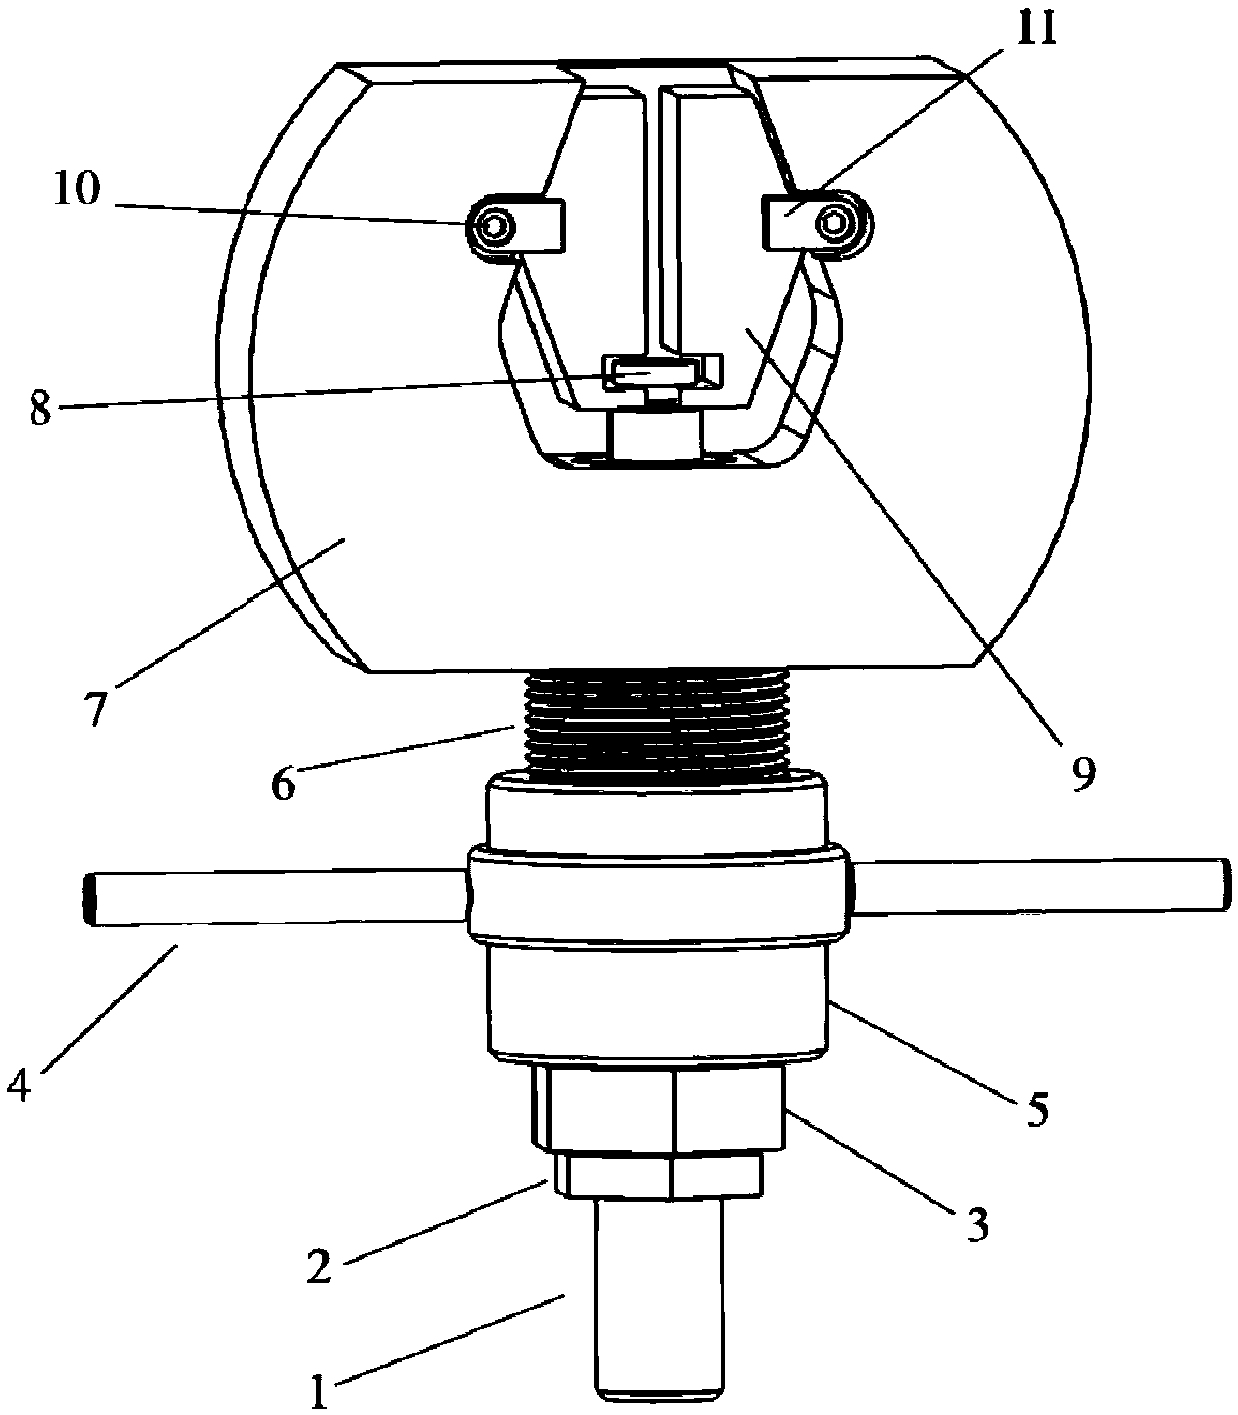 A high-temperature tensile fatigue test fixture and method for flat specimens